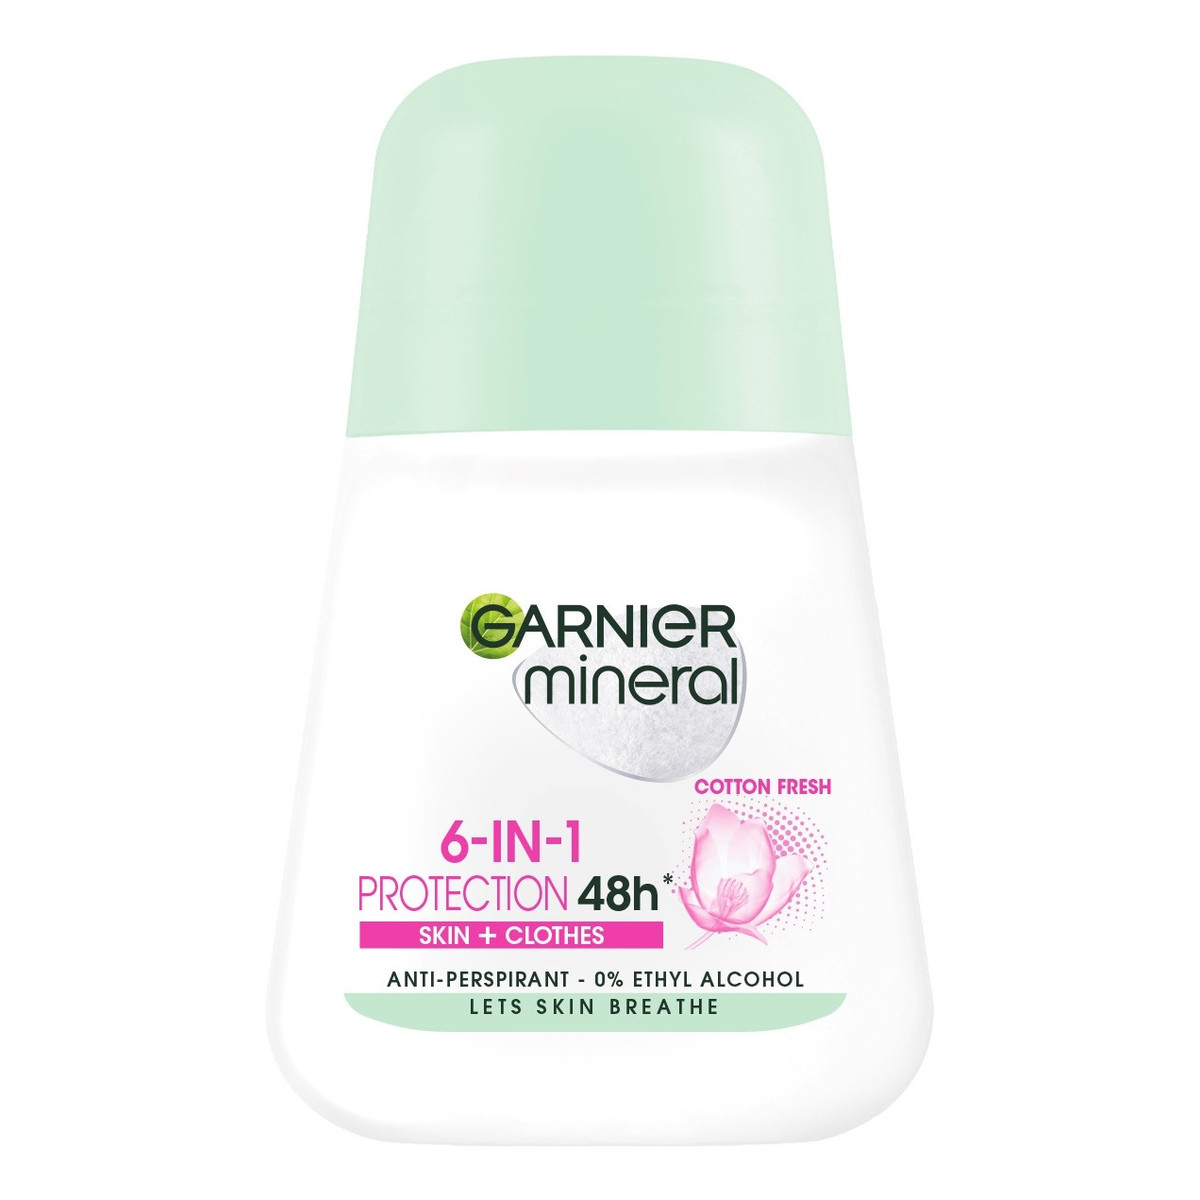 Garnier Mineral Dezodorant roll-on 6in1 Protection 48h Cotton Fresh Skin+Clothes 50ml